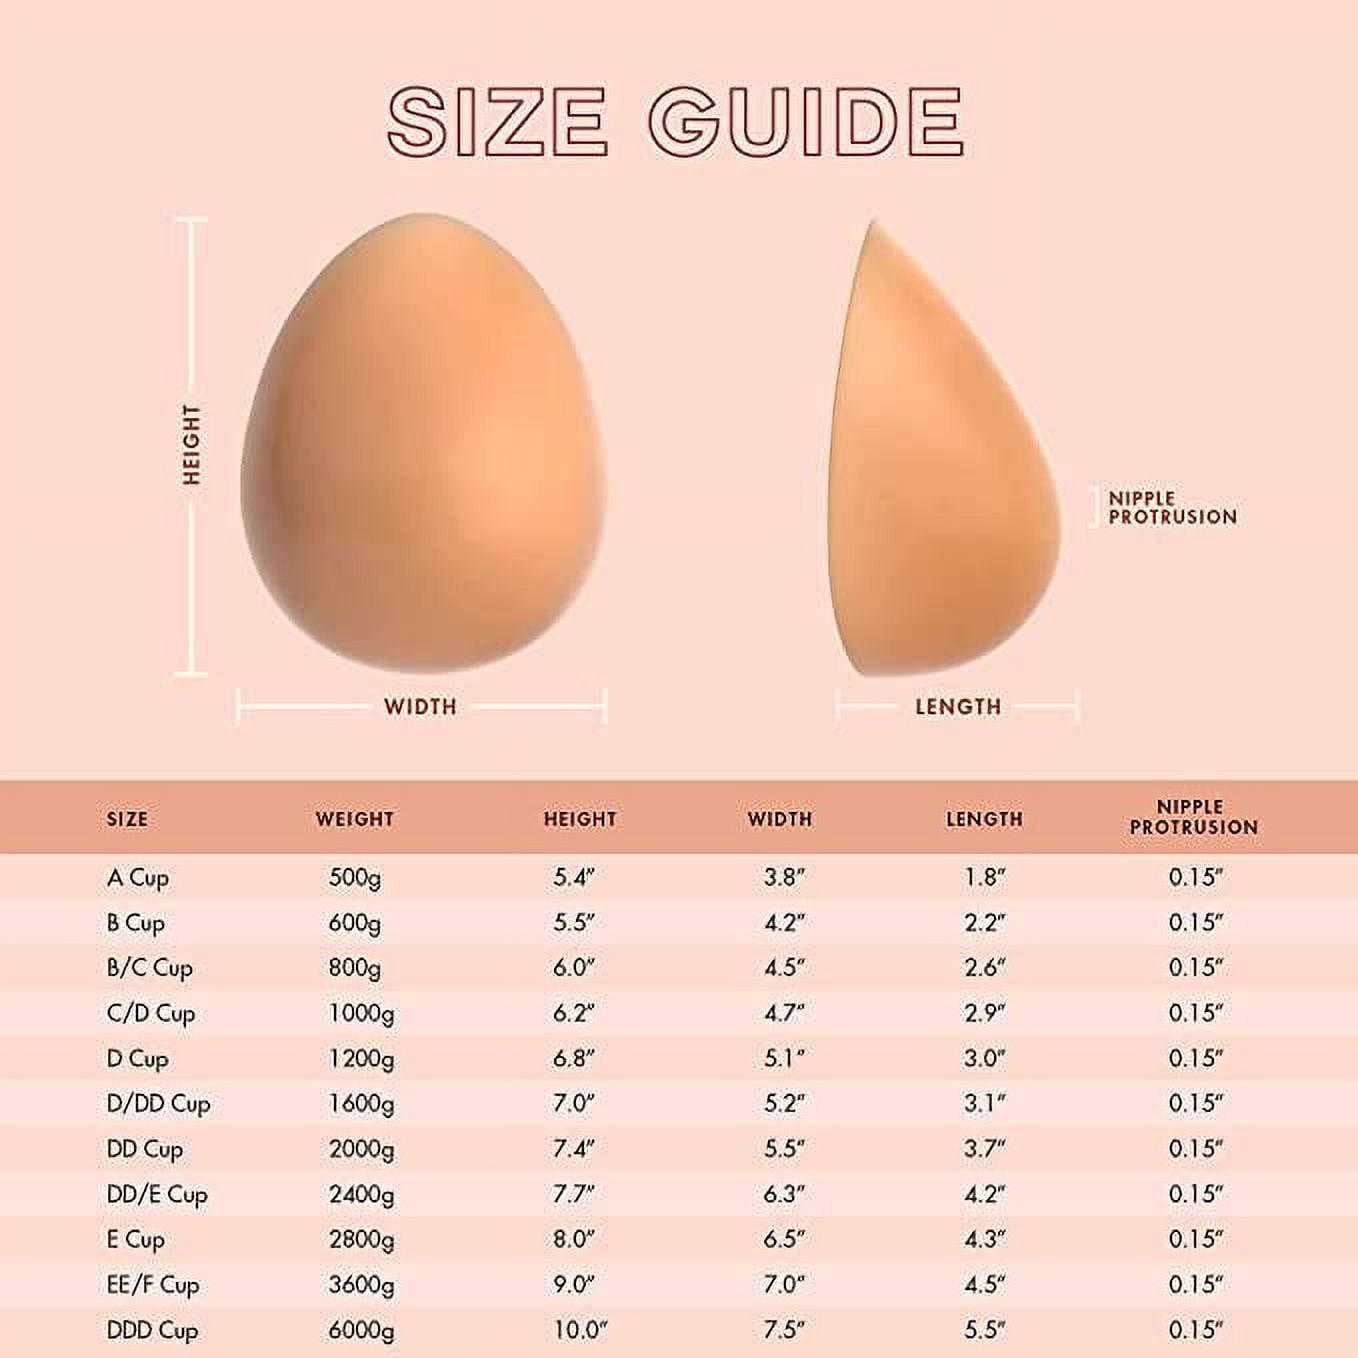 Feminique Silicone Breast Forms for Mastectomy, DDD Cup (6000g) Suntan 